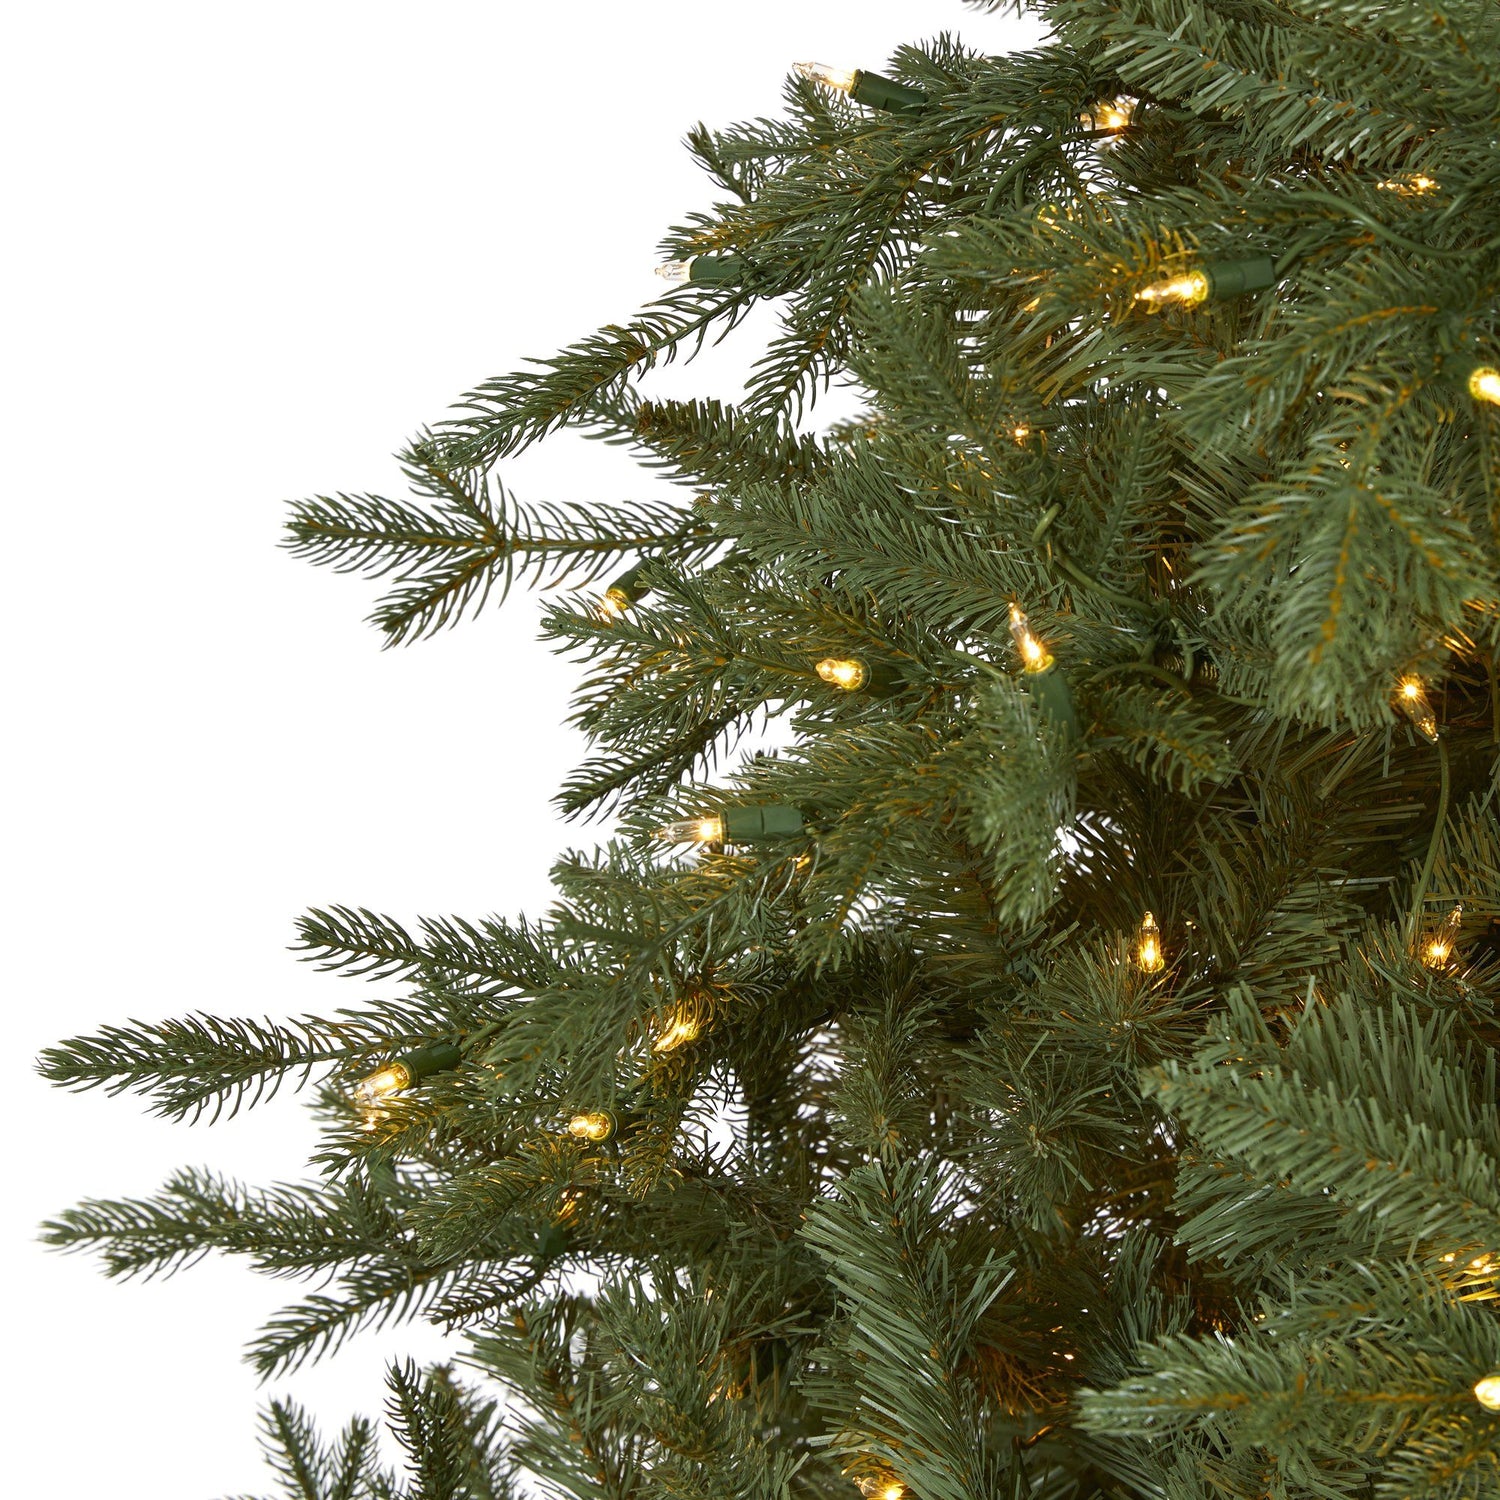 7.5' New Hampshire Spruce Artificial Christmas Tree with 650 Warm White Lights and 1462 Bendable Branches